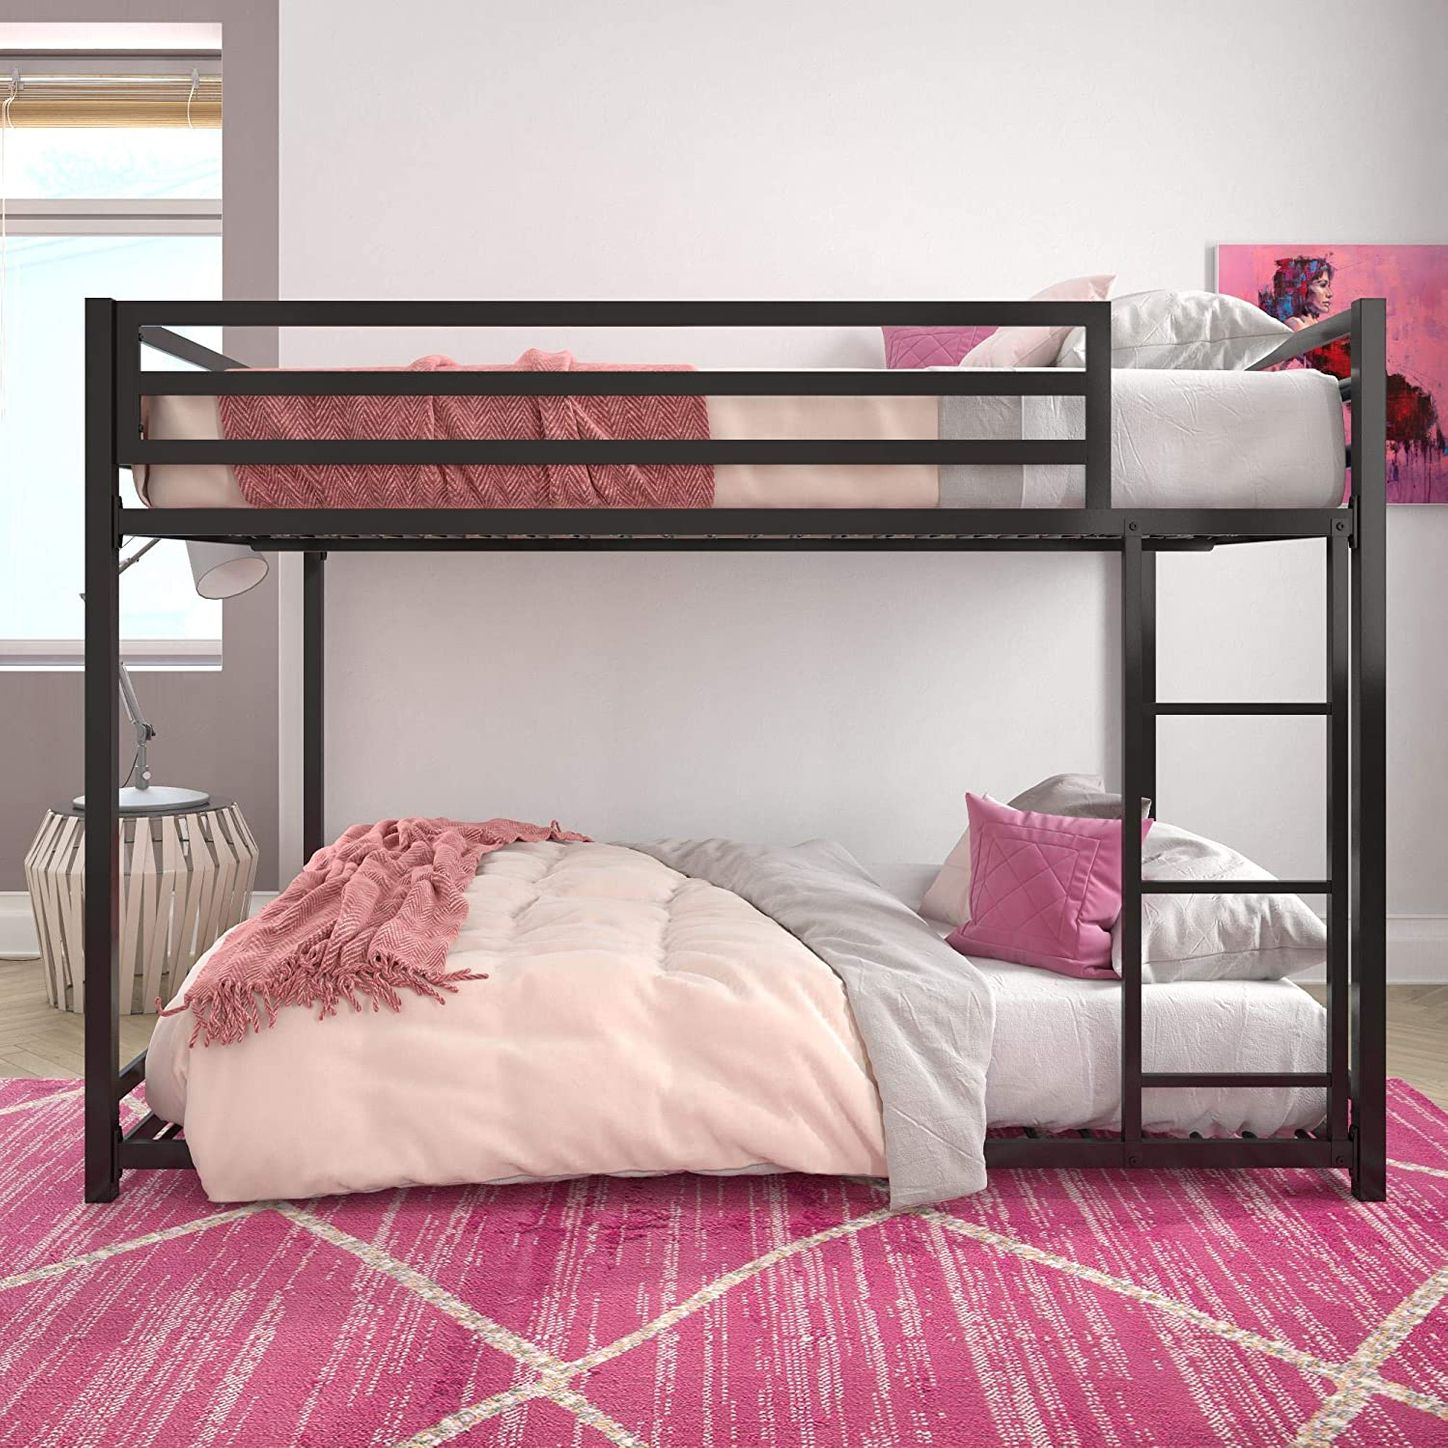 8 Best Bunk Beds 2020 The Strategist, Sleep And Play Usa Bunk Beds